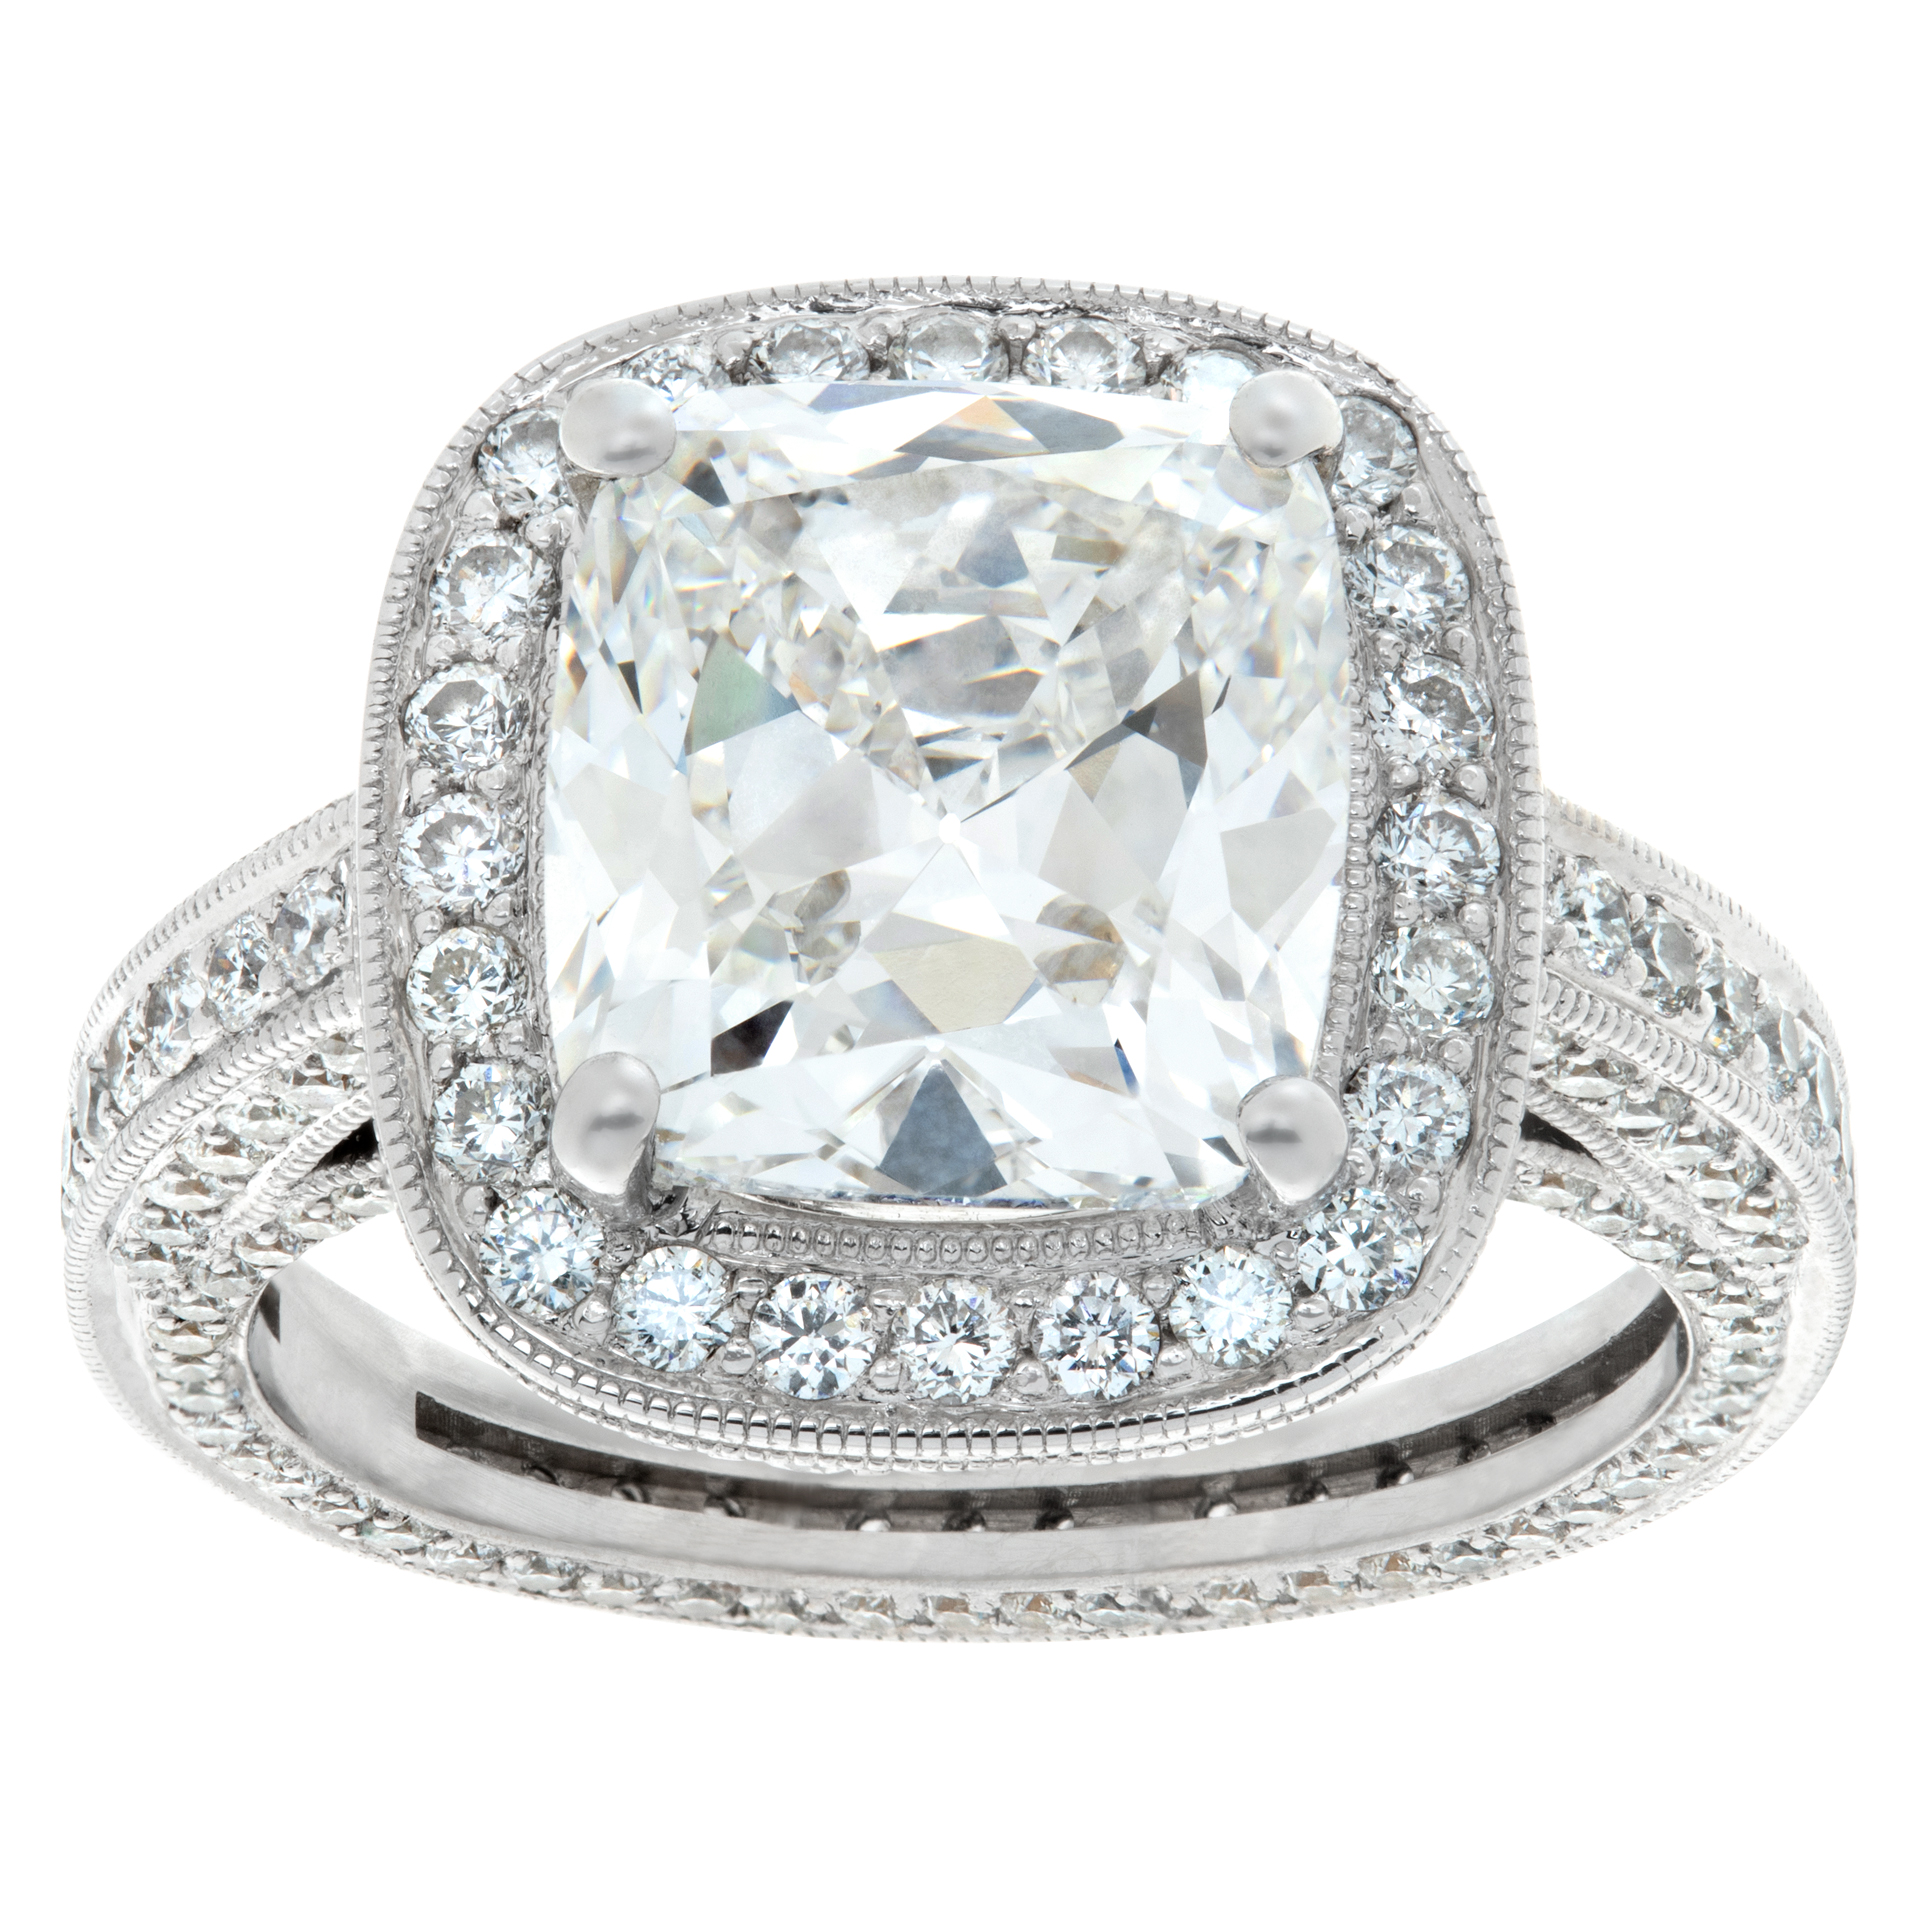 GIA certified cushion modified brilliant cut diamond 5.17 carat ( G color, SI2 clarity) ring image 1